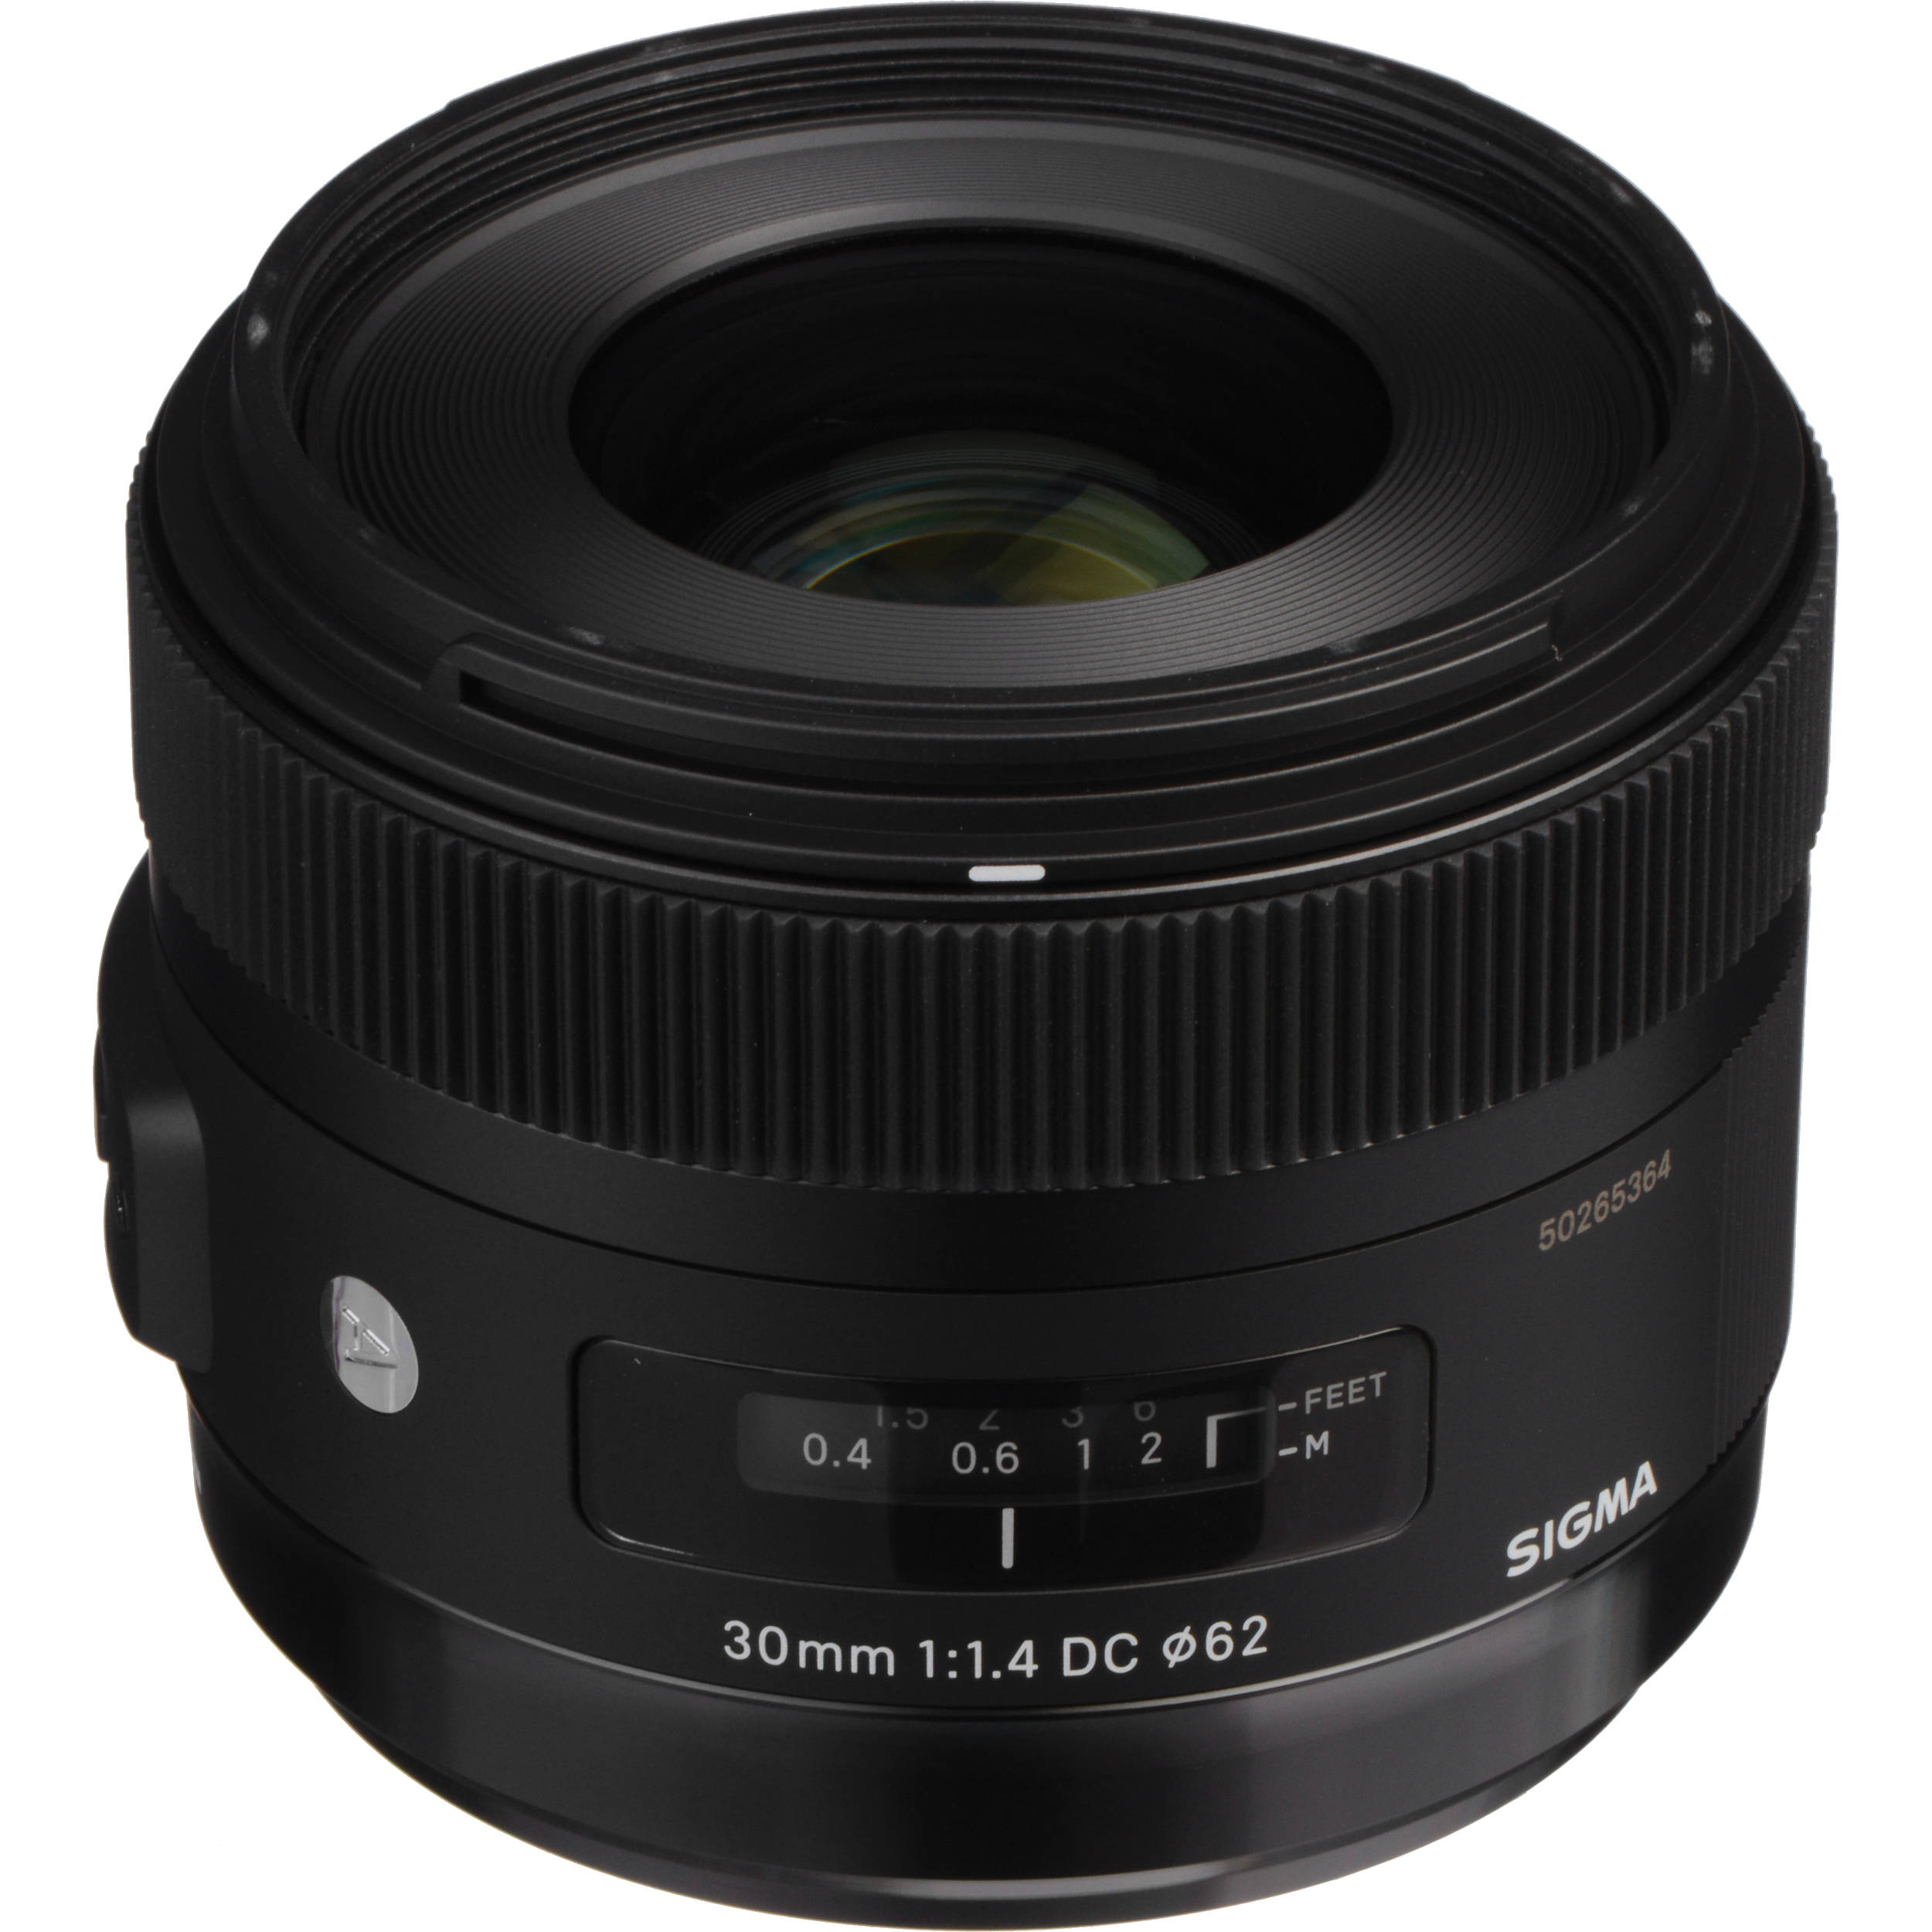 Sigma 30mm F 1 4 Dc Hsm Art Lens For Sony A 301205 B H Photo